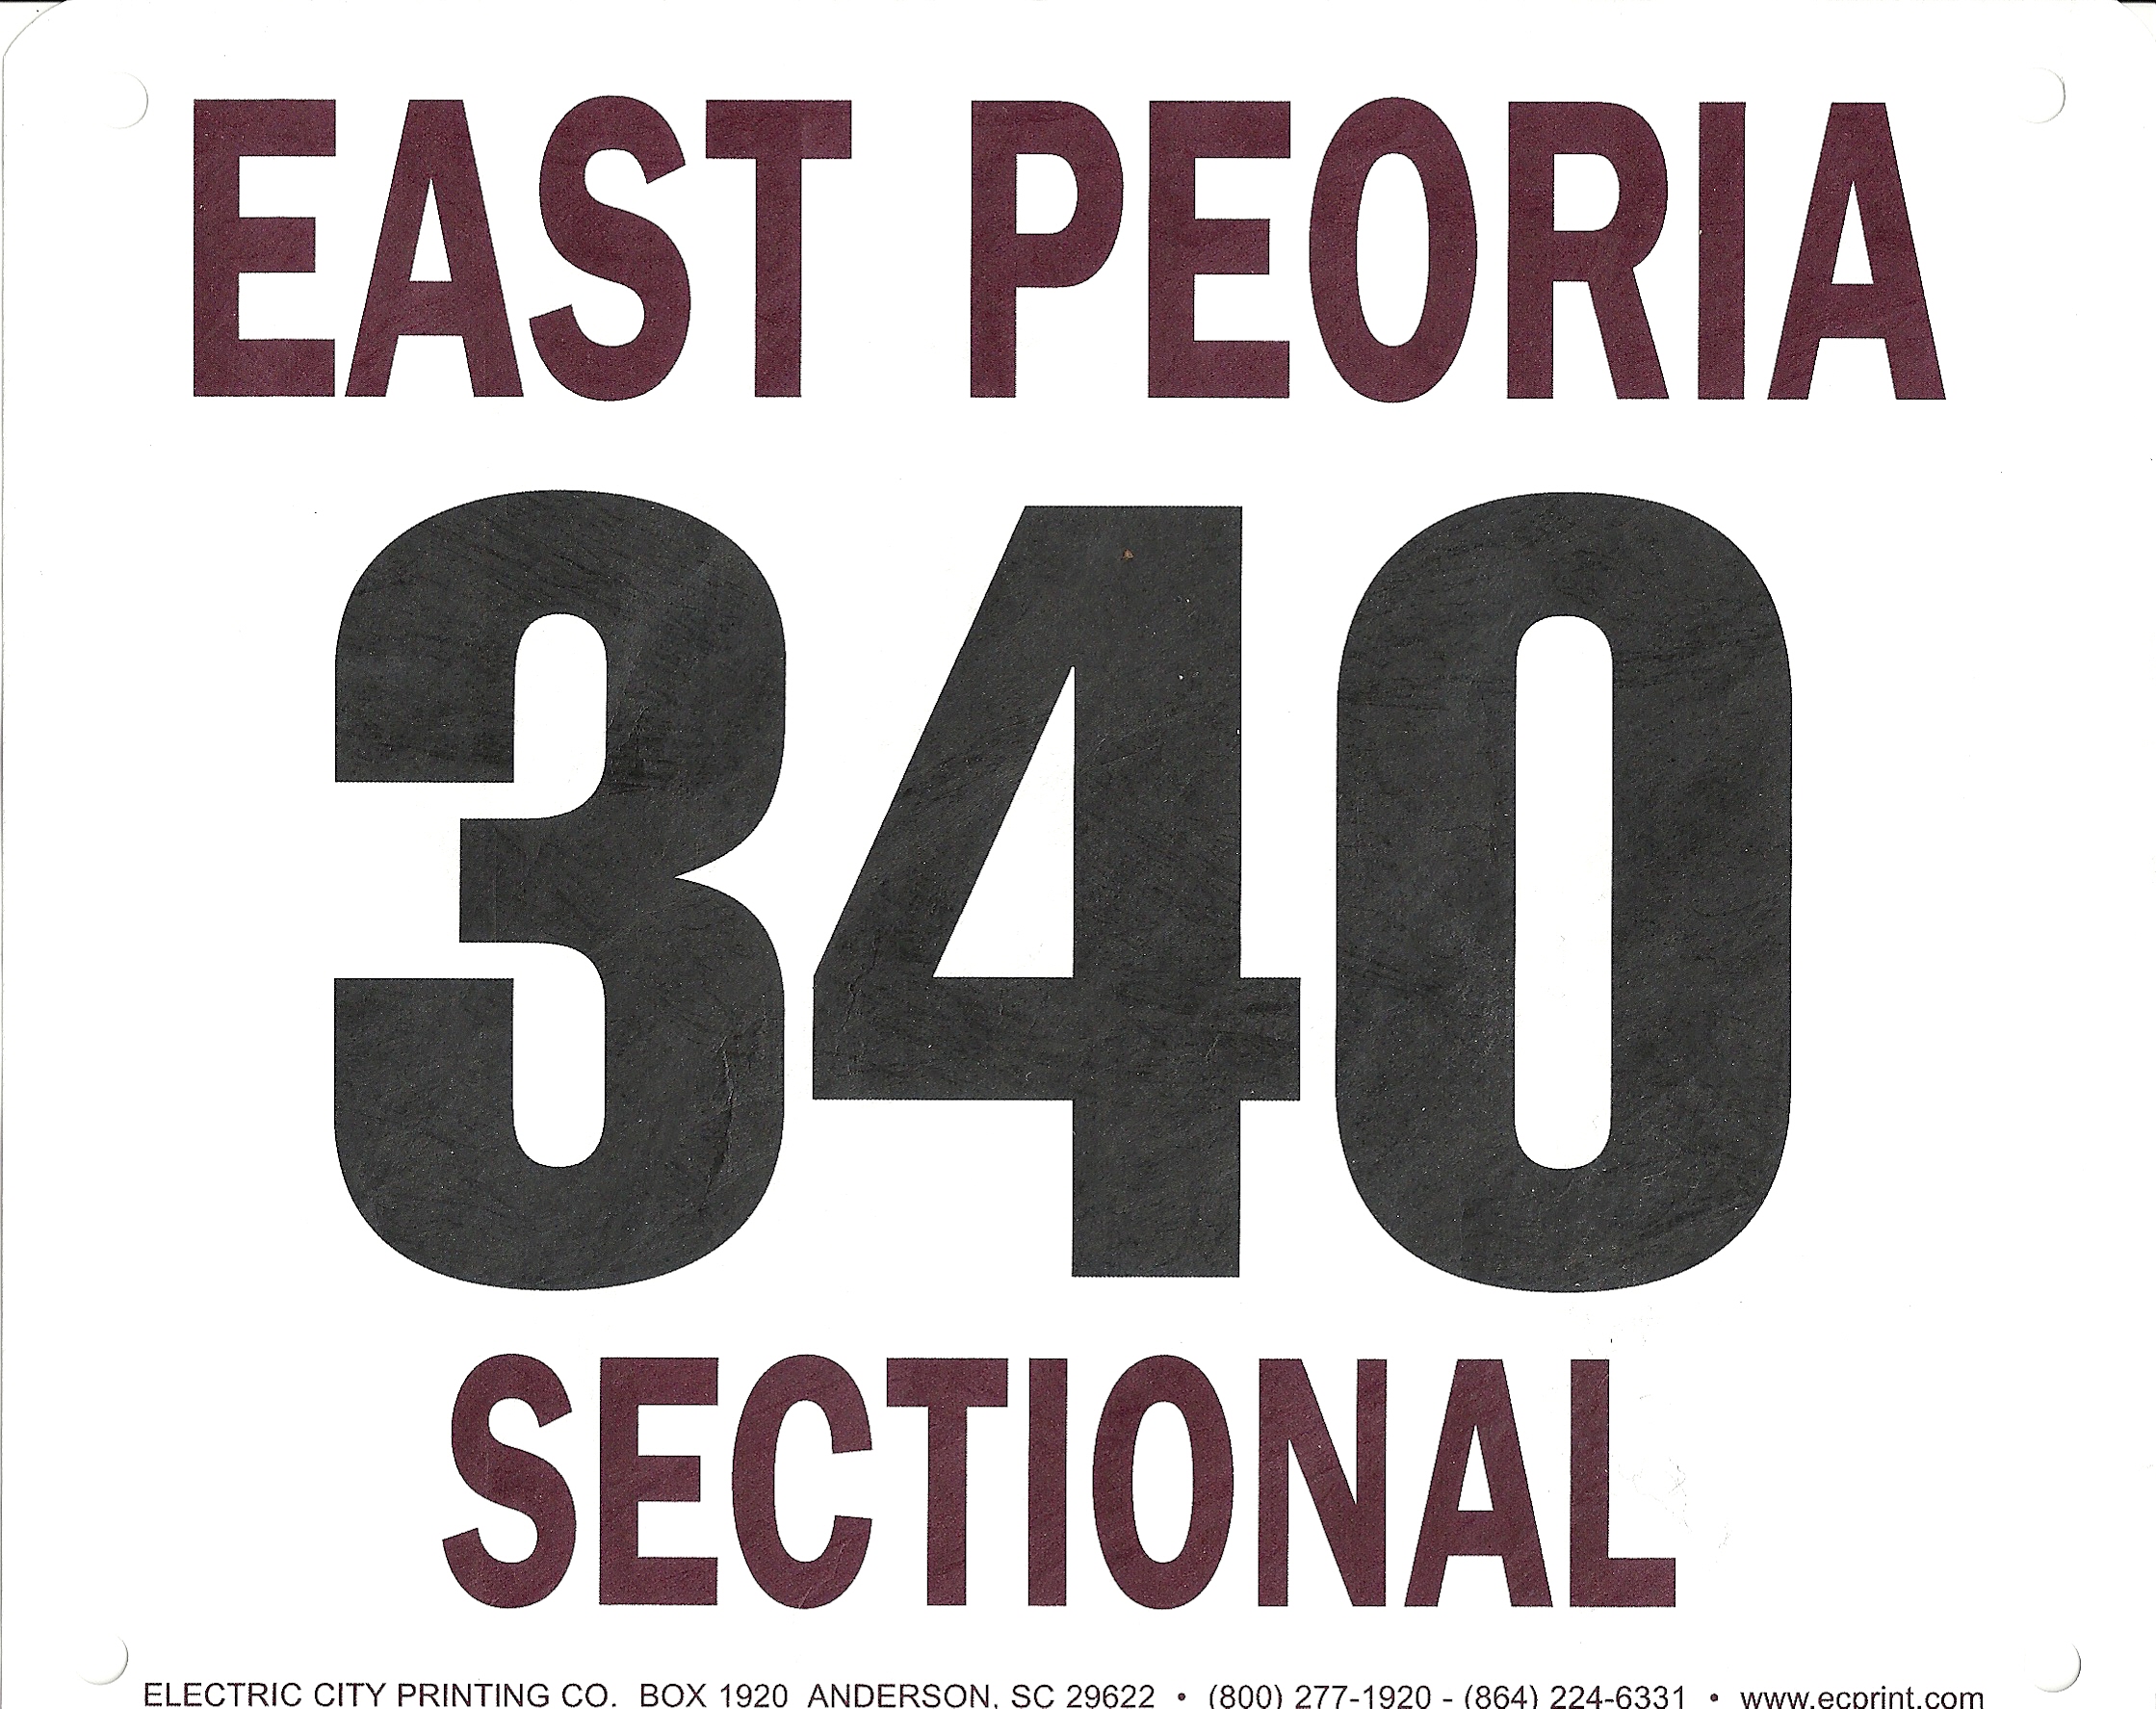 Sectional Race
        Number